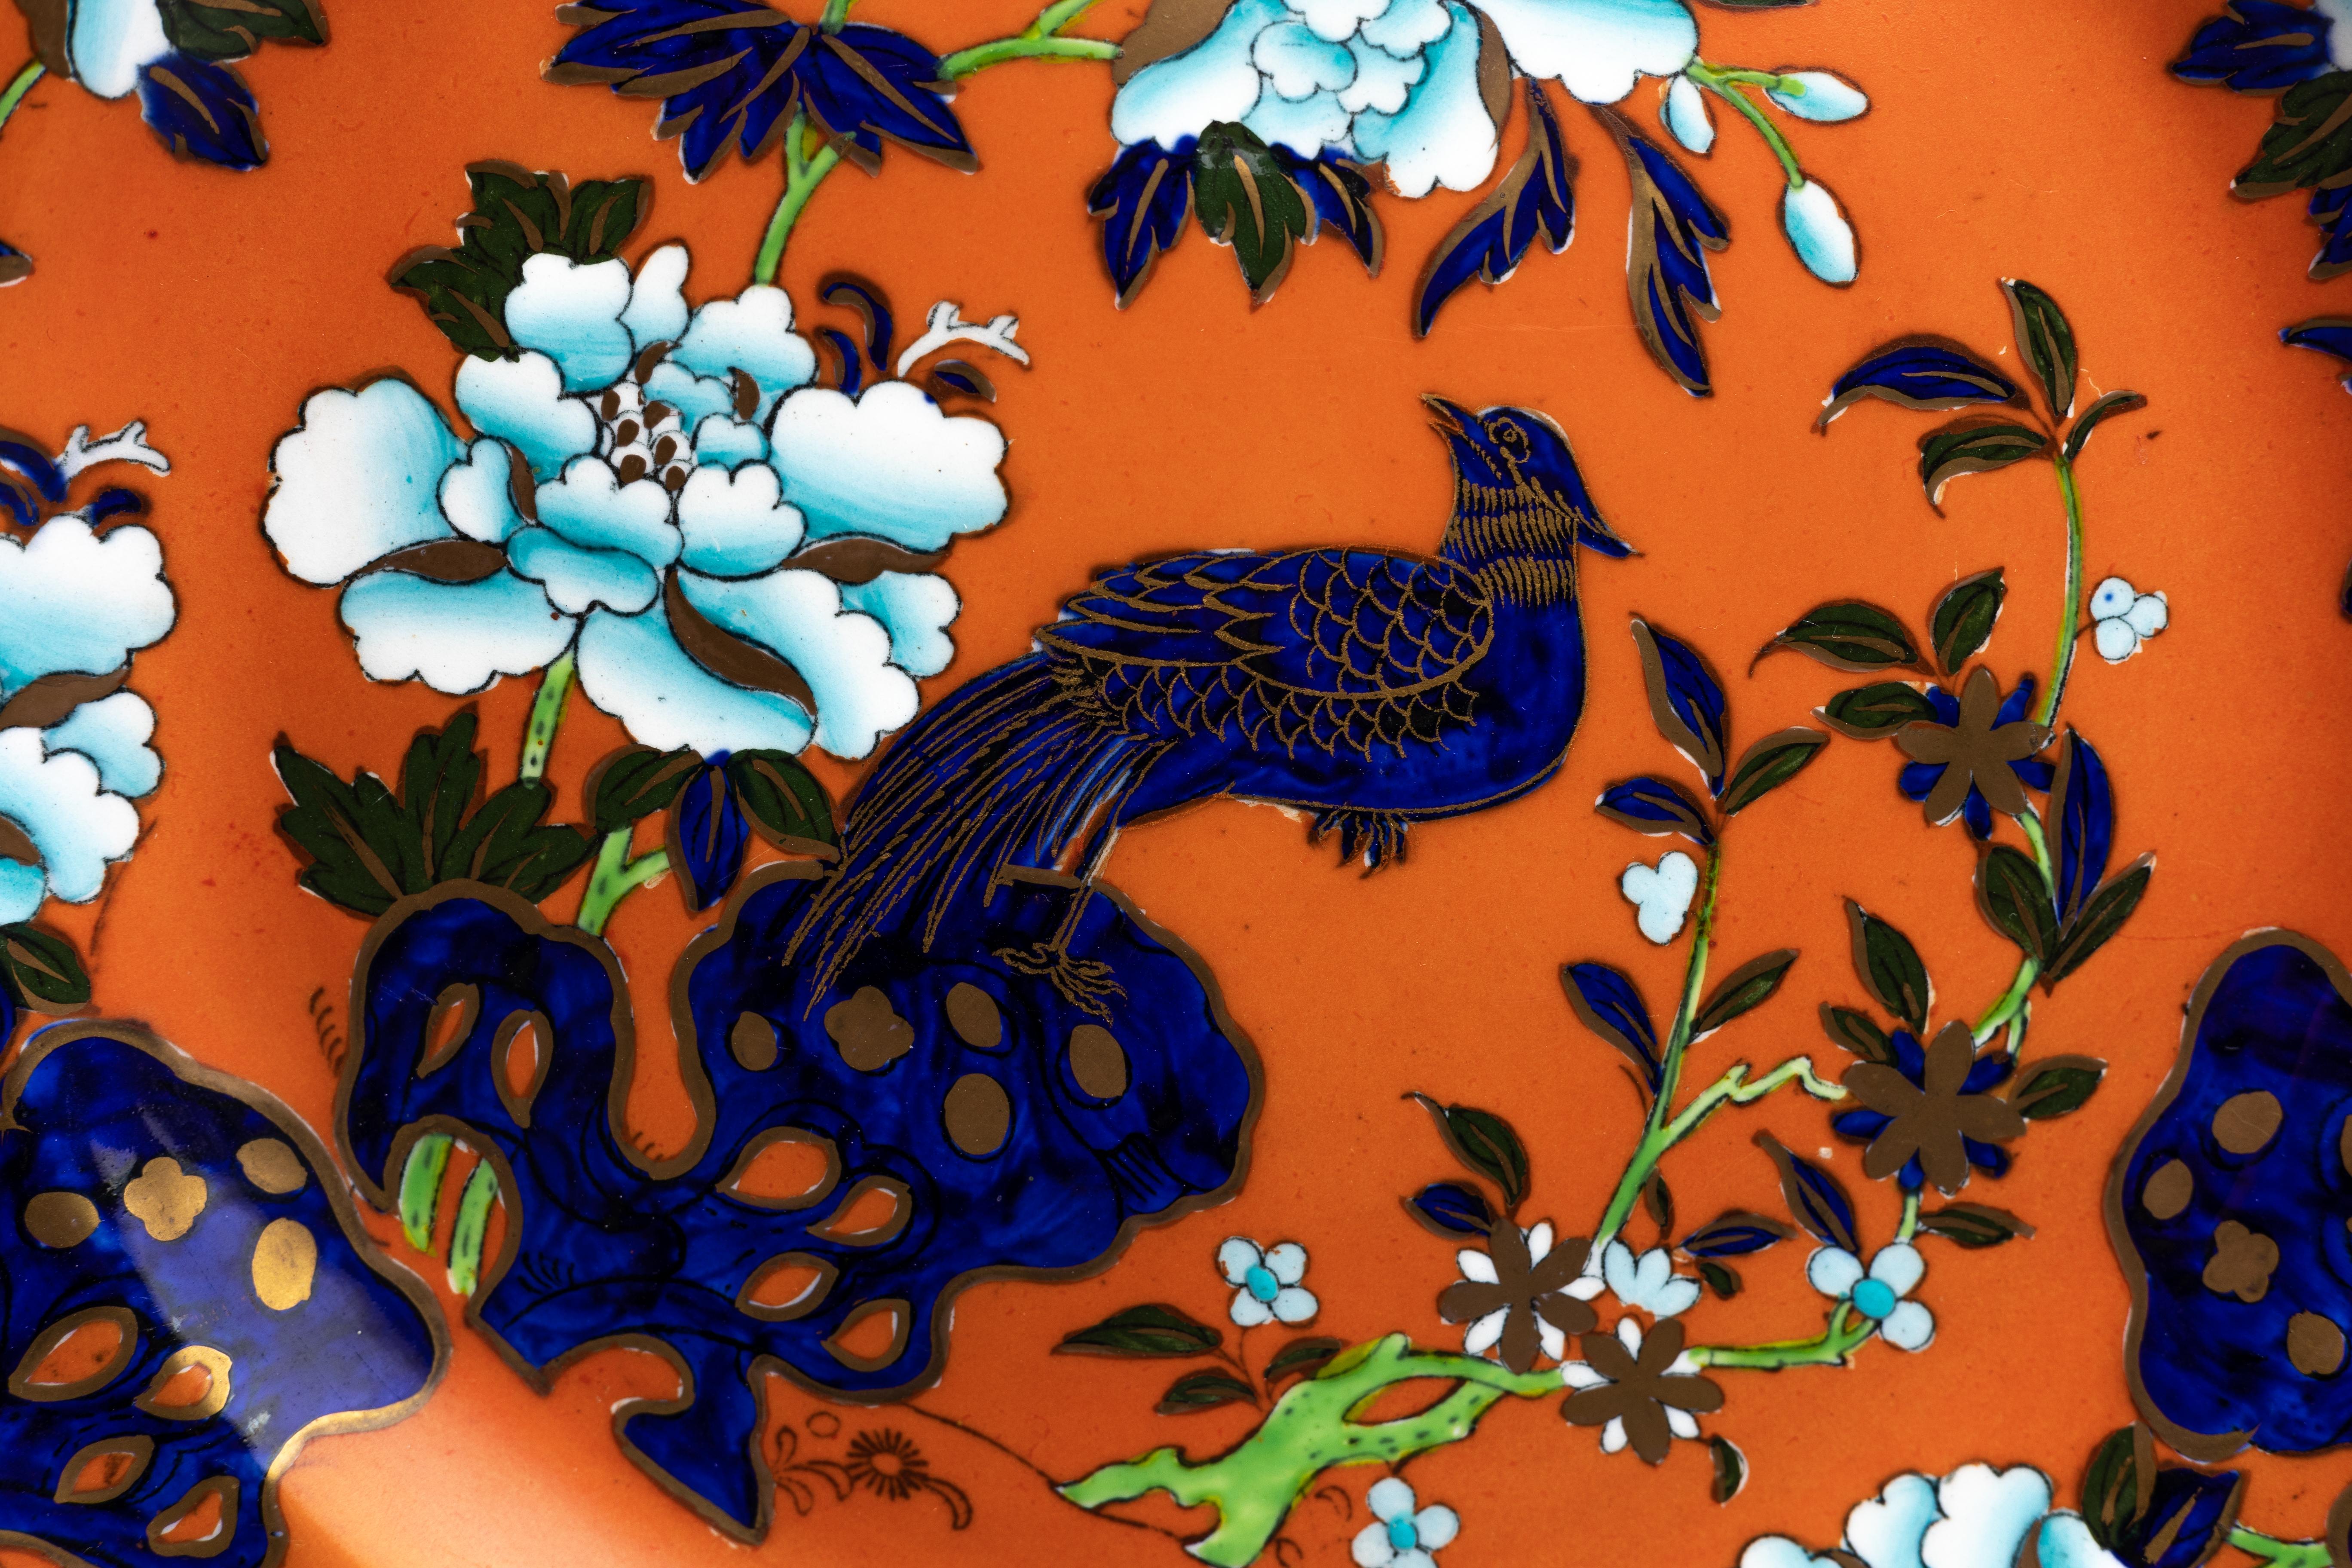 A Masons Ashworth ironstone dinner plate in the ‘Pheasant’ pattern on a striking orange glaze, made in England ca. 1910.

Filled with chinoiserie imagery, the Masons Ashworth ironstone dinner plate makes a bold statement with a striking orange